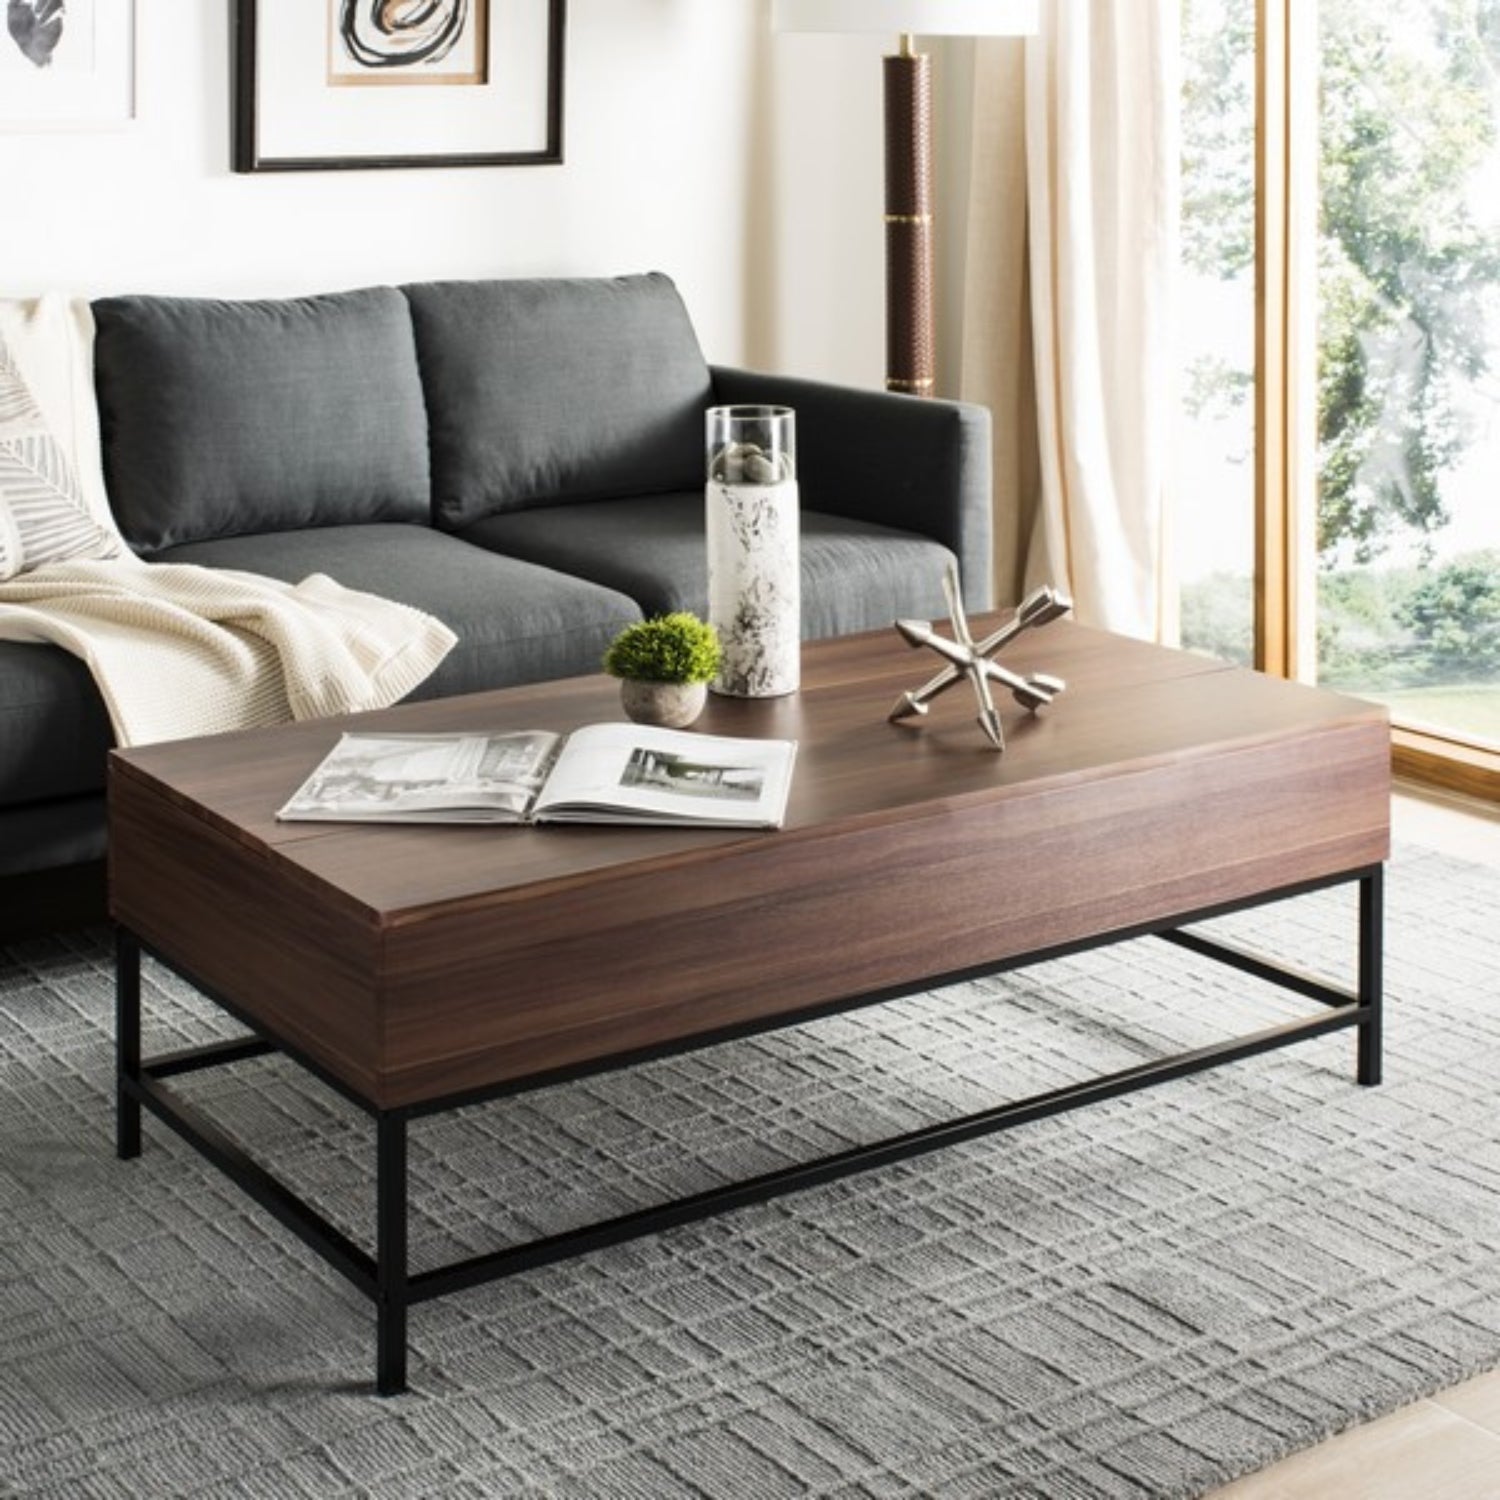 Askov coffee table with secret storage space.